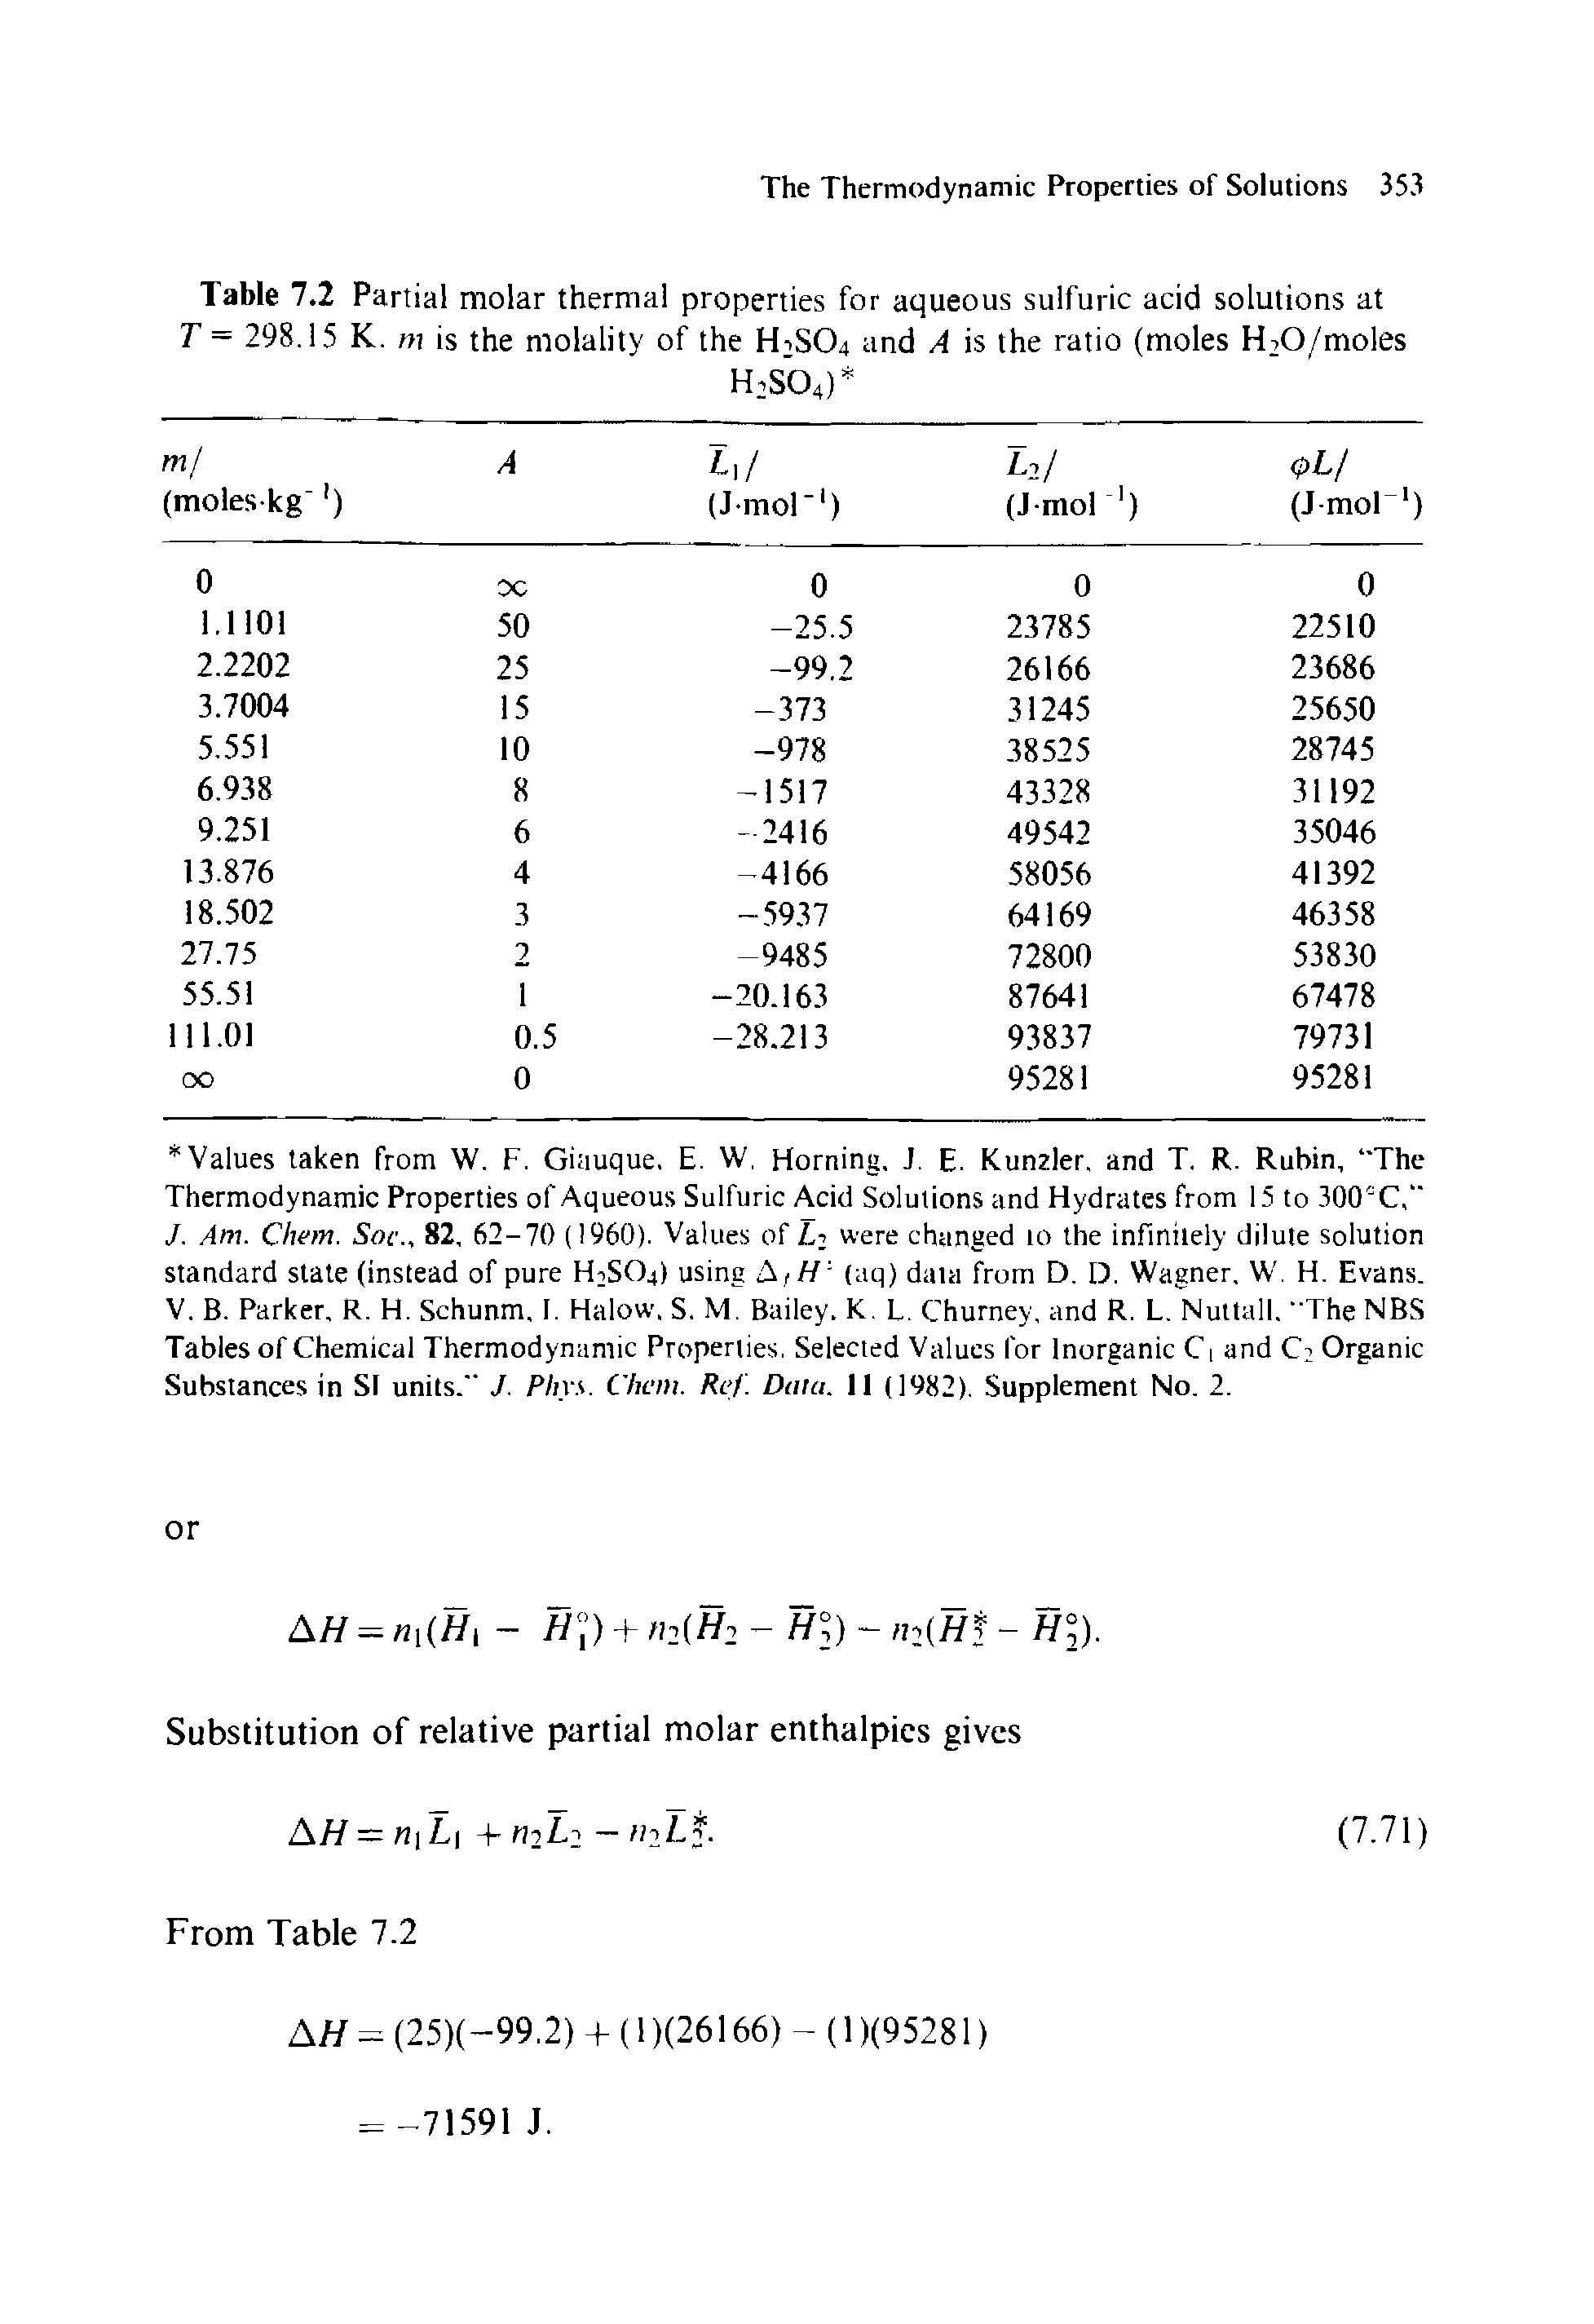 Table 7.2 Partial molar thermal properties for aqueous sulfuric acid solutions at T = 298.15 K. m is the molality of the H1SO4 and A is the ratio (moles FFO/moles...